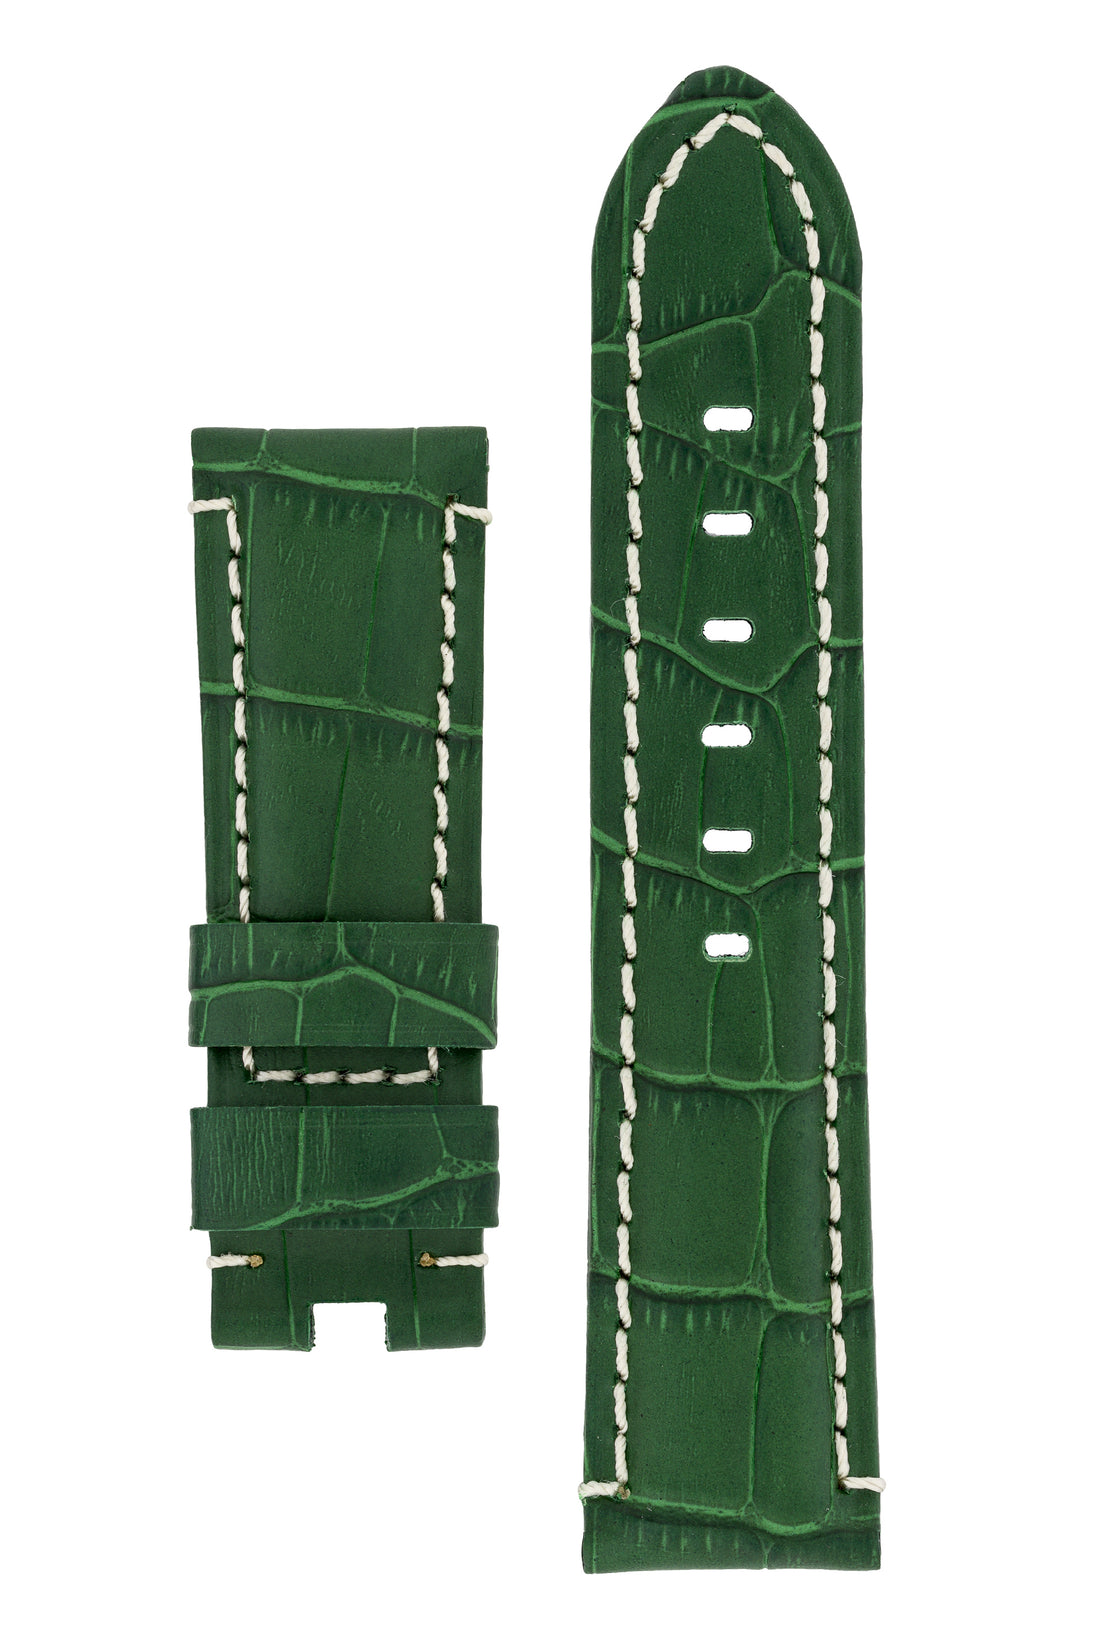 Panerai Style Deployment Buckle Straps | Watch Obsession